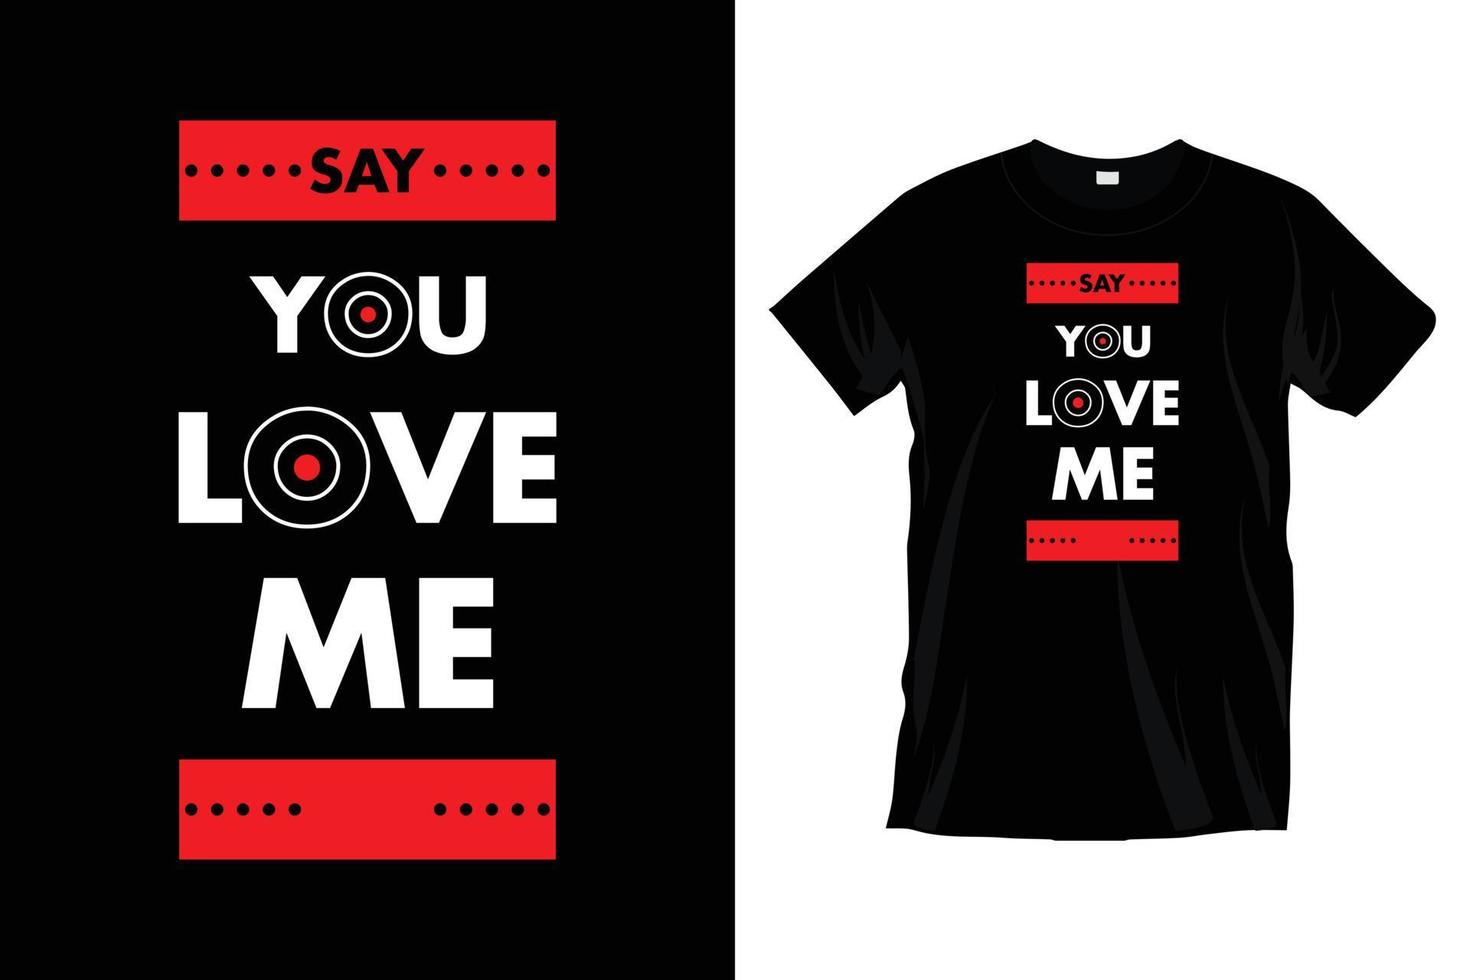 Say you love me. Modern love message love quotes typography t shirt design for prints, apparel, vector, art, illustration, typography, poster, template, trendy black tee shirt design. vector